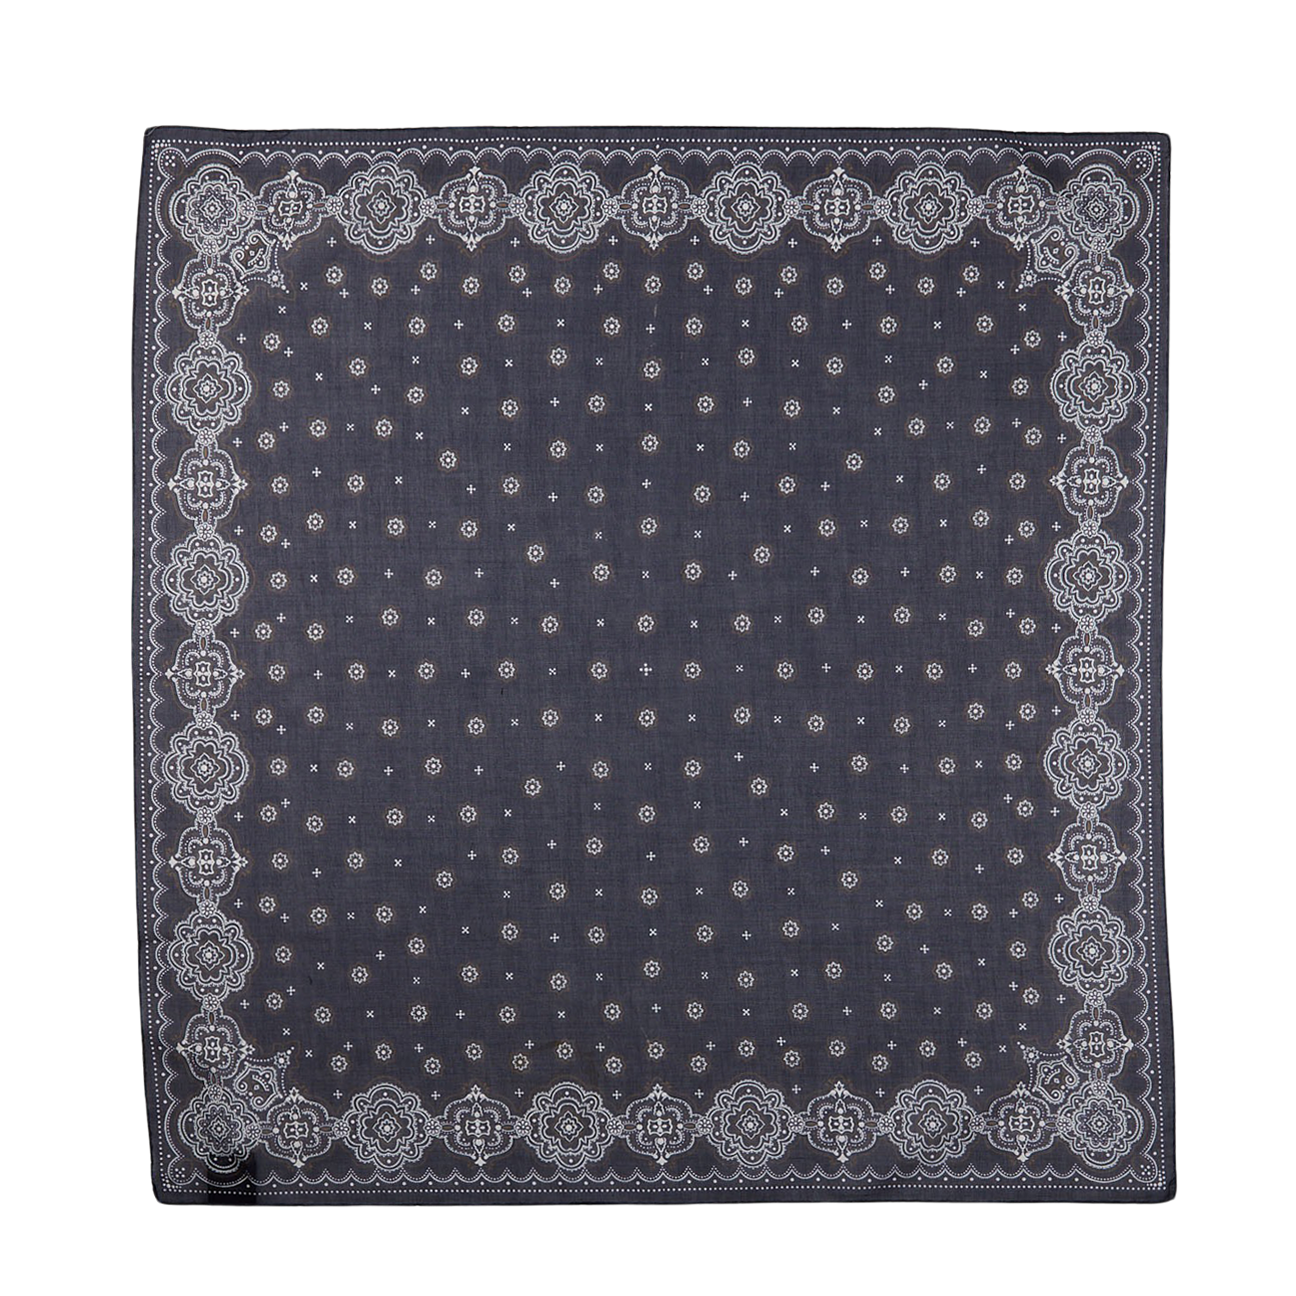 A Navy Blue Medallion Printed Cotton Bandana with a white paisley pattern and a border design by Amanda Christensen.